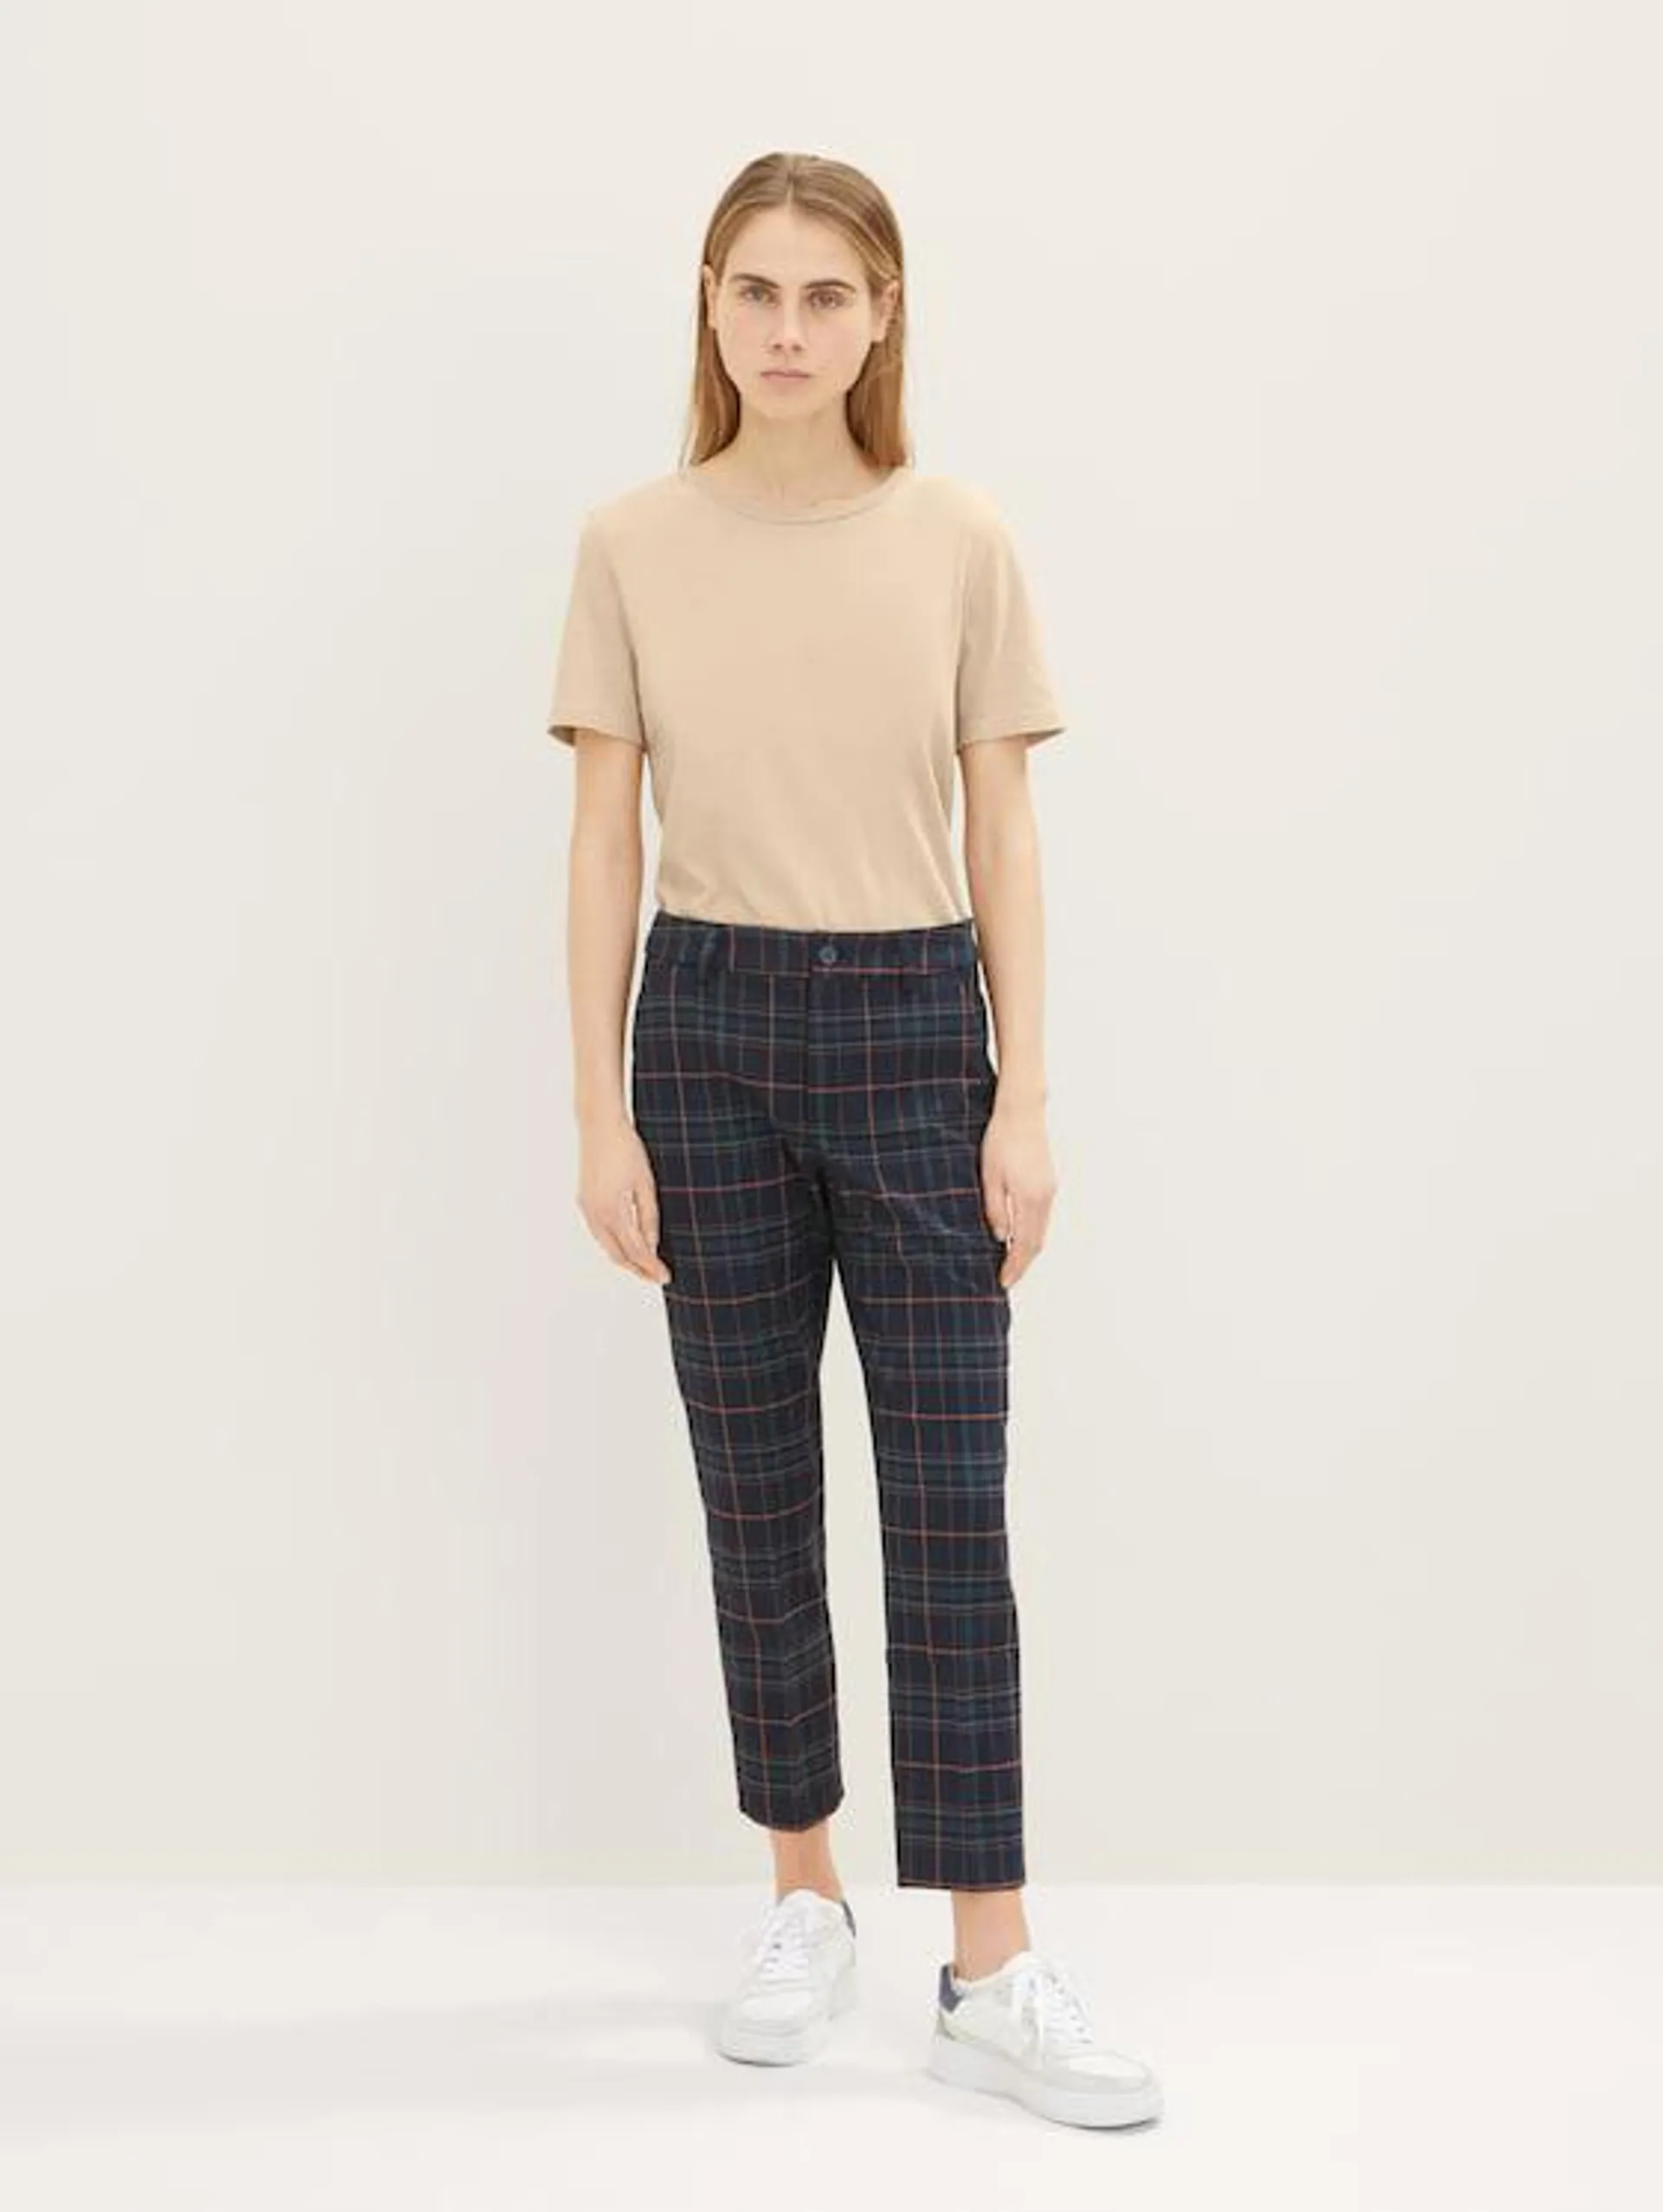 Cigarette trousers in a check pattern